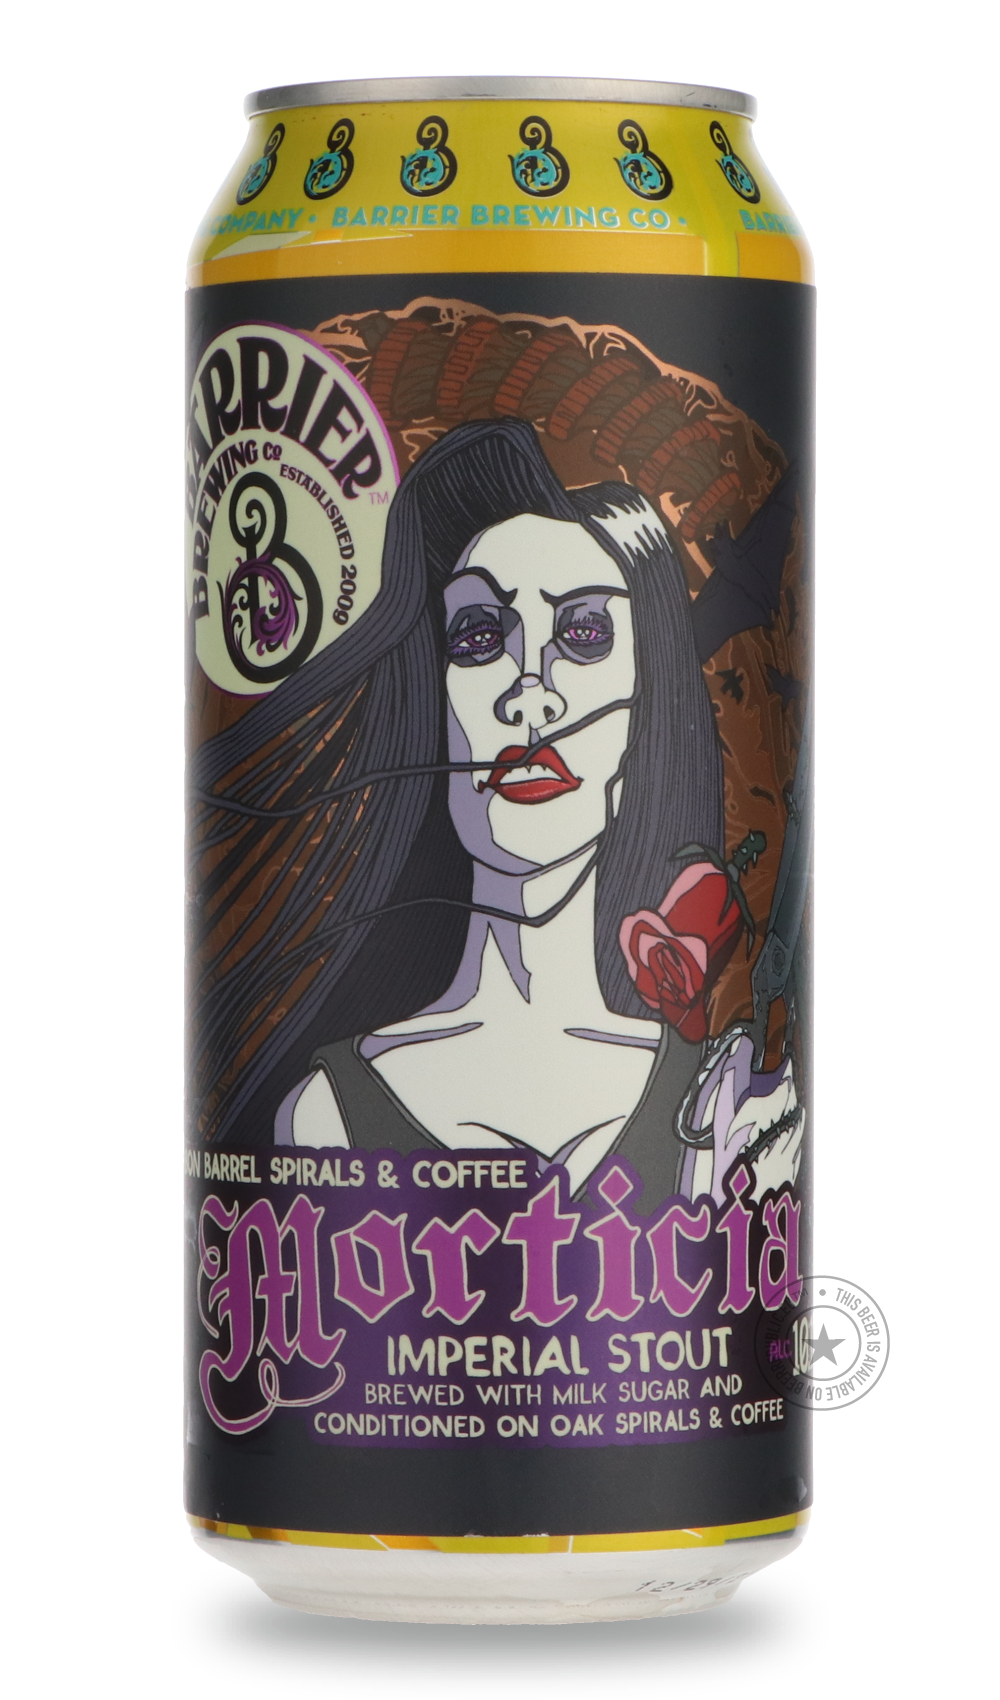 -Barrier- Morticia-Stout & Porter- Only @ Beer Republic - The best online beer store for American & Canadian craft beer - Buy beer online from the USA and Canada - Bier online kopen - Amerikaans bier kopen - Craft beer store - Craft beer kopen - Amerikanisch bier kaufen - Bier online kaufen - Acheter biere online - IPA - Stout - Porter - New England IPA - Hazy IPA - Imperial Stout - Barrel Aged - Barrel Aged Imperial Stout - Brown - Dark beer - Blond - Blonde - Pilsner - Lager - Wheat - Weizen - Amber - Bar